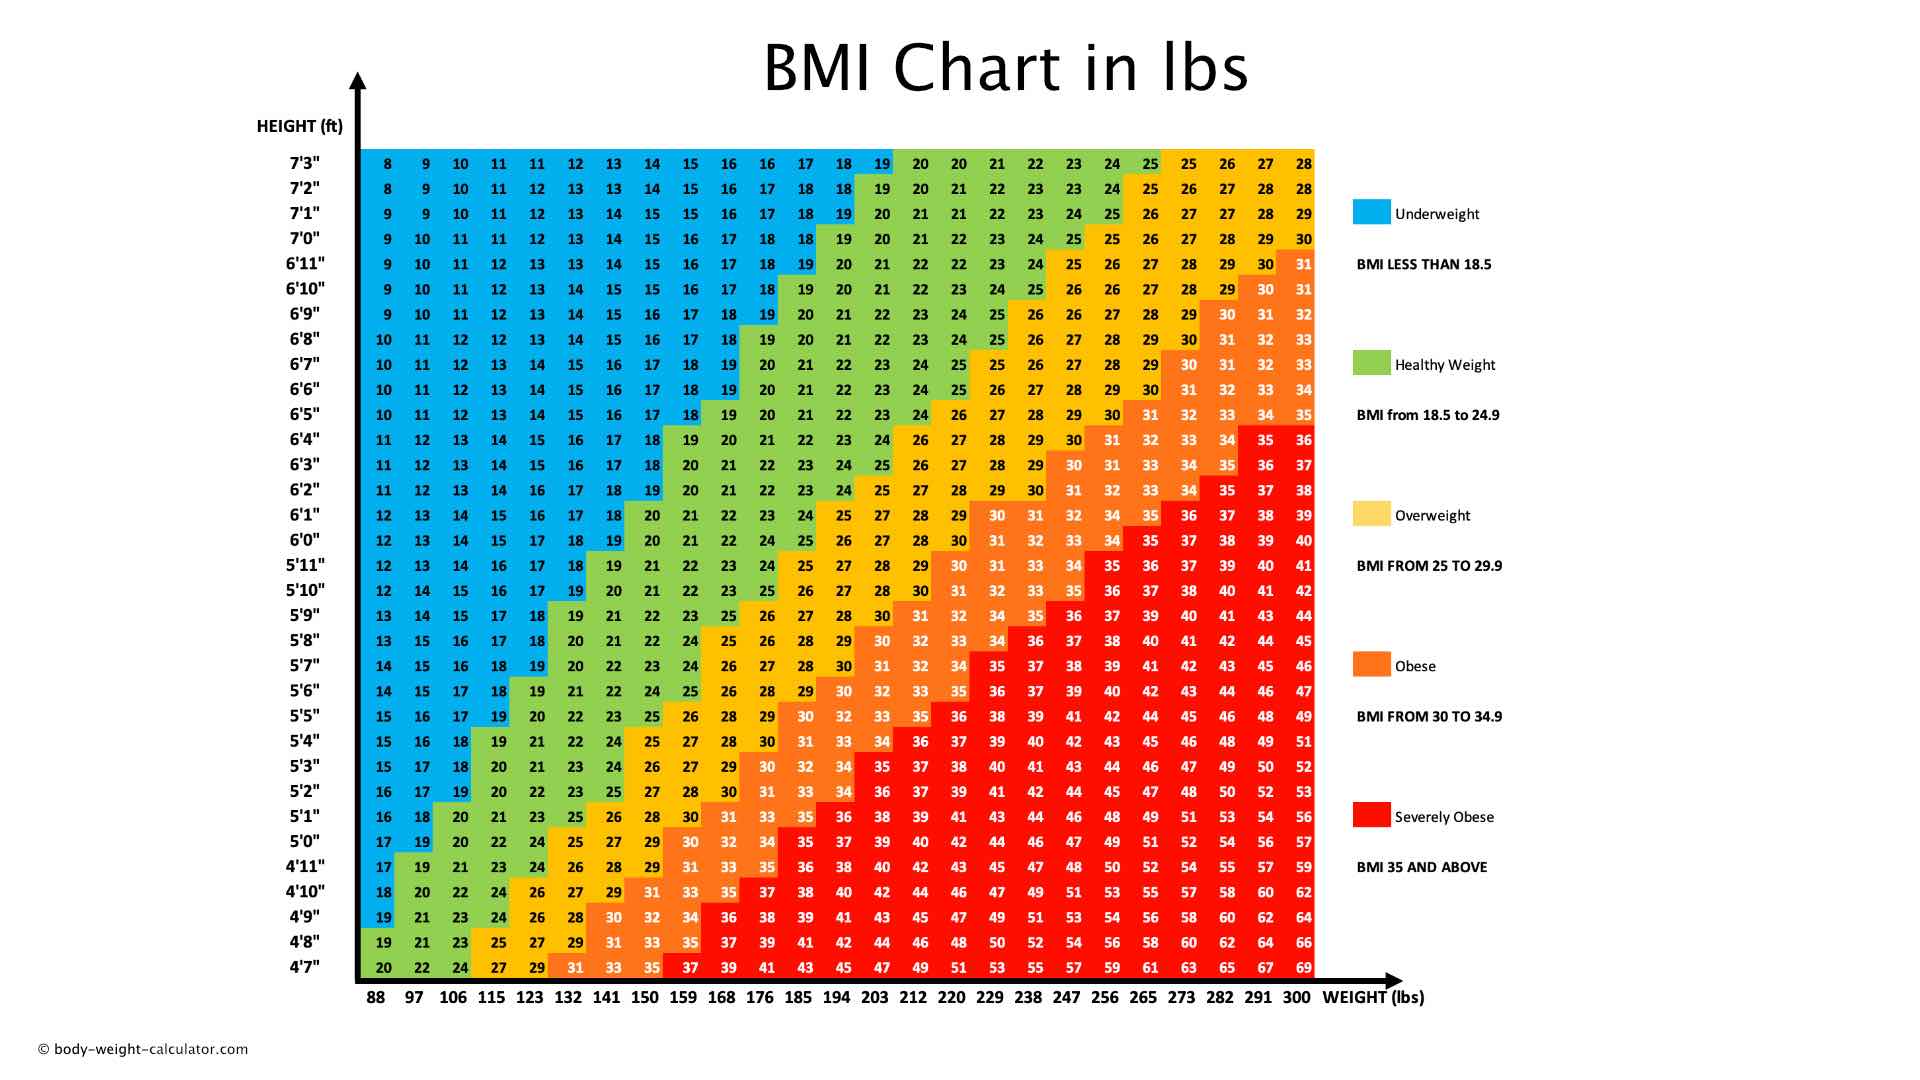 BMI chart for males by age in the United States - 2022